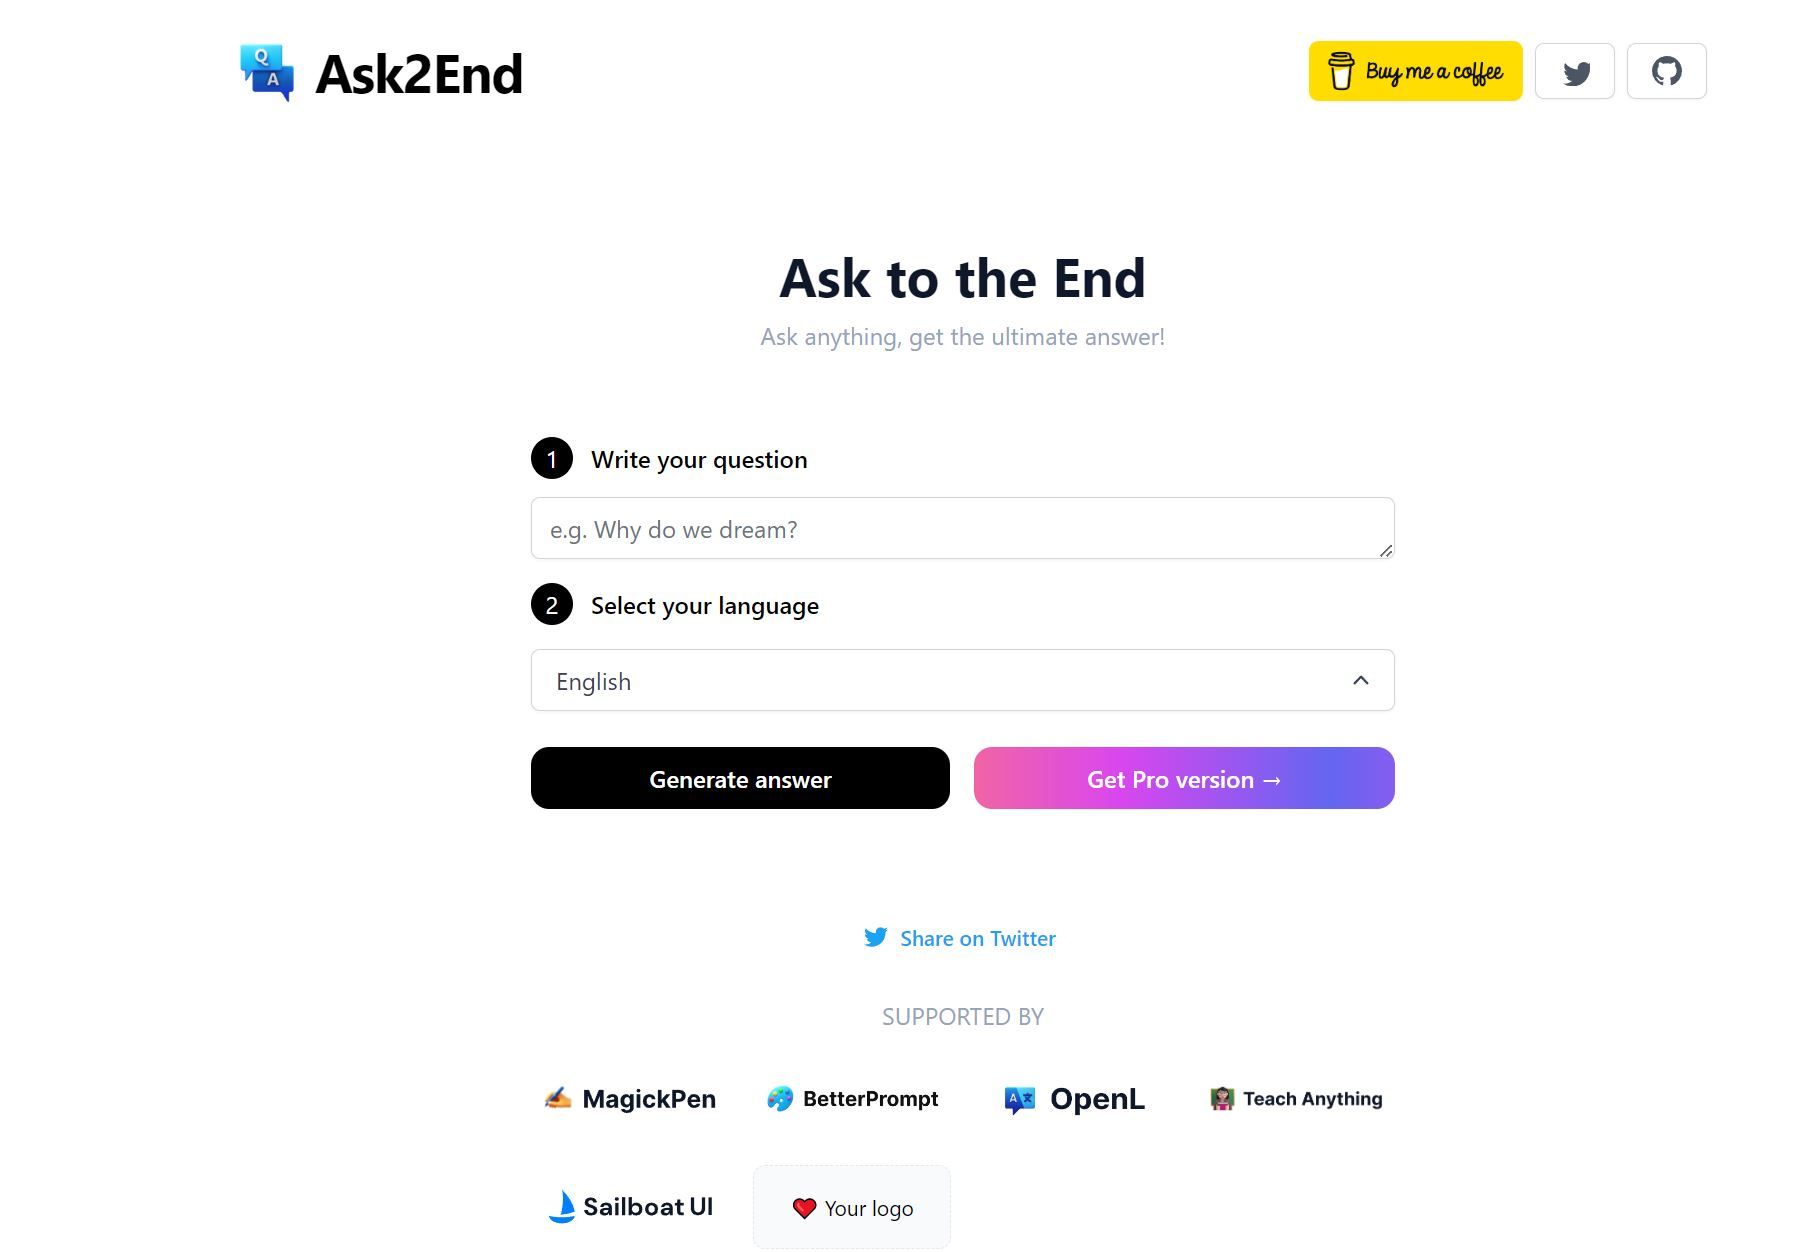  Ask2End - AI-powered question and answer tool